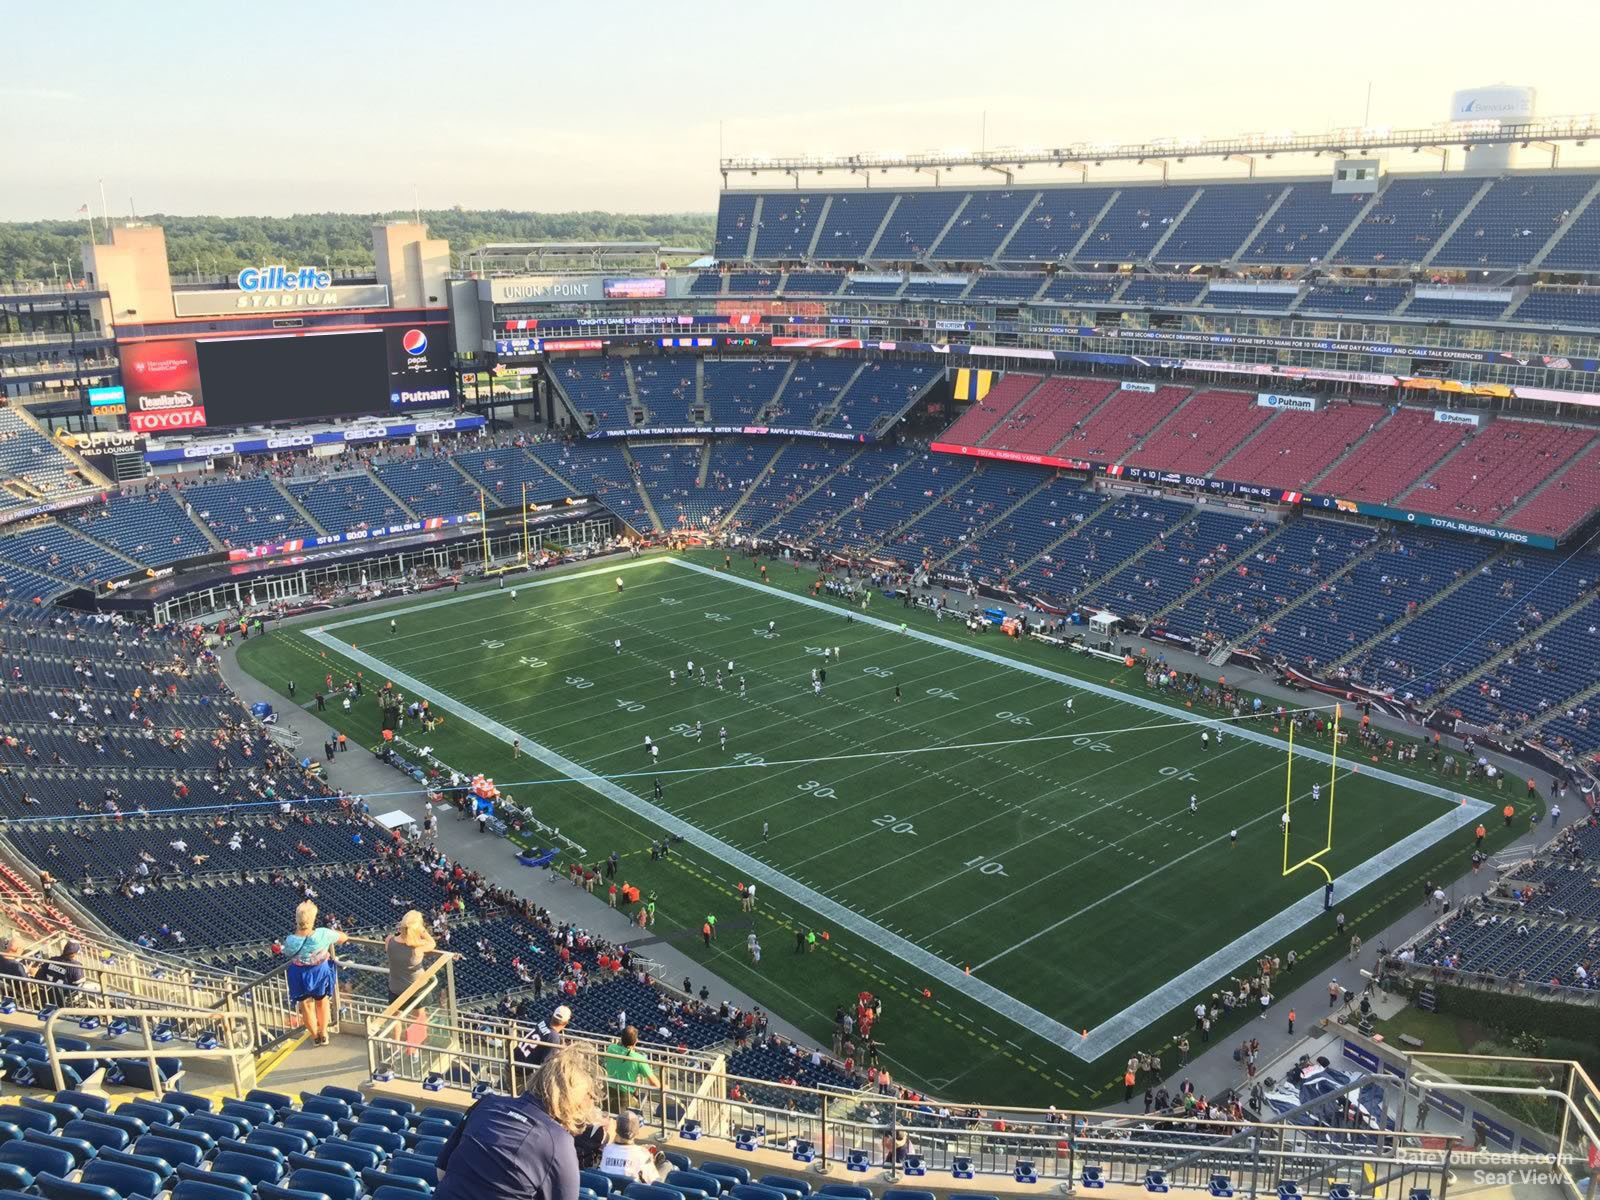 section 302, row 19 seat view  for football - gillette stadium